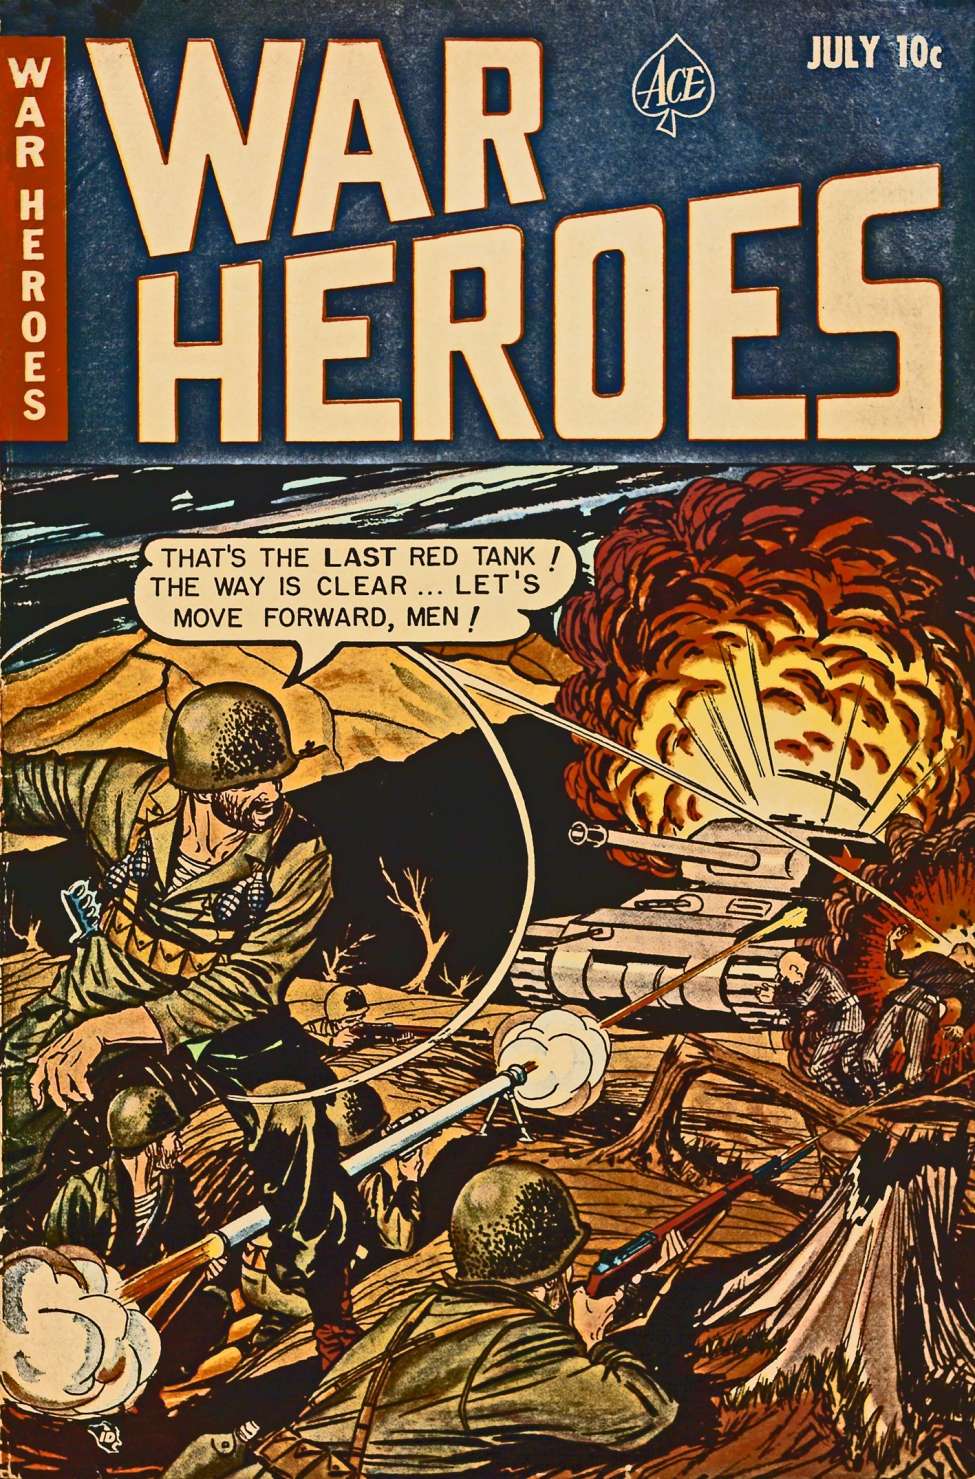 Comic Book Cover For War Heroes 2 - Version 2